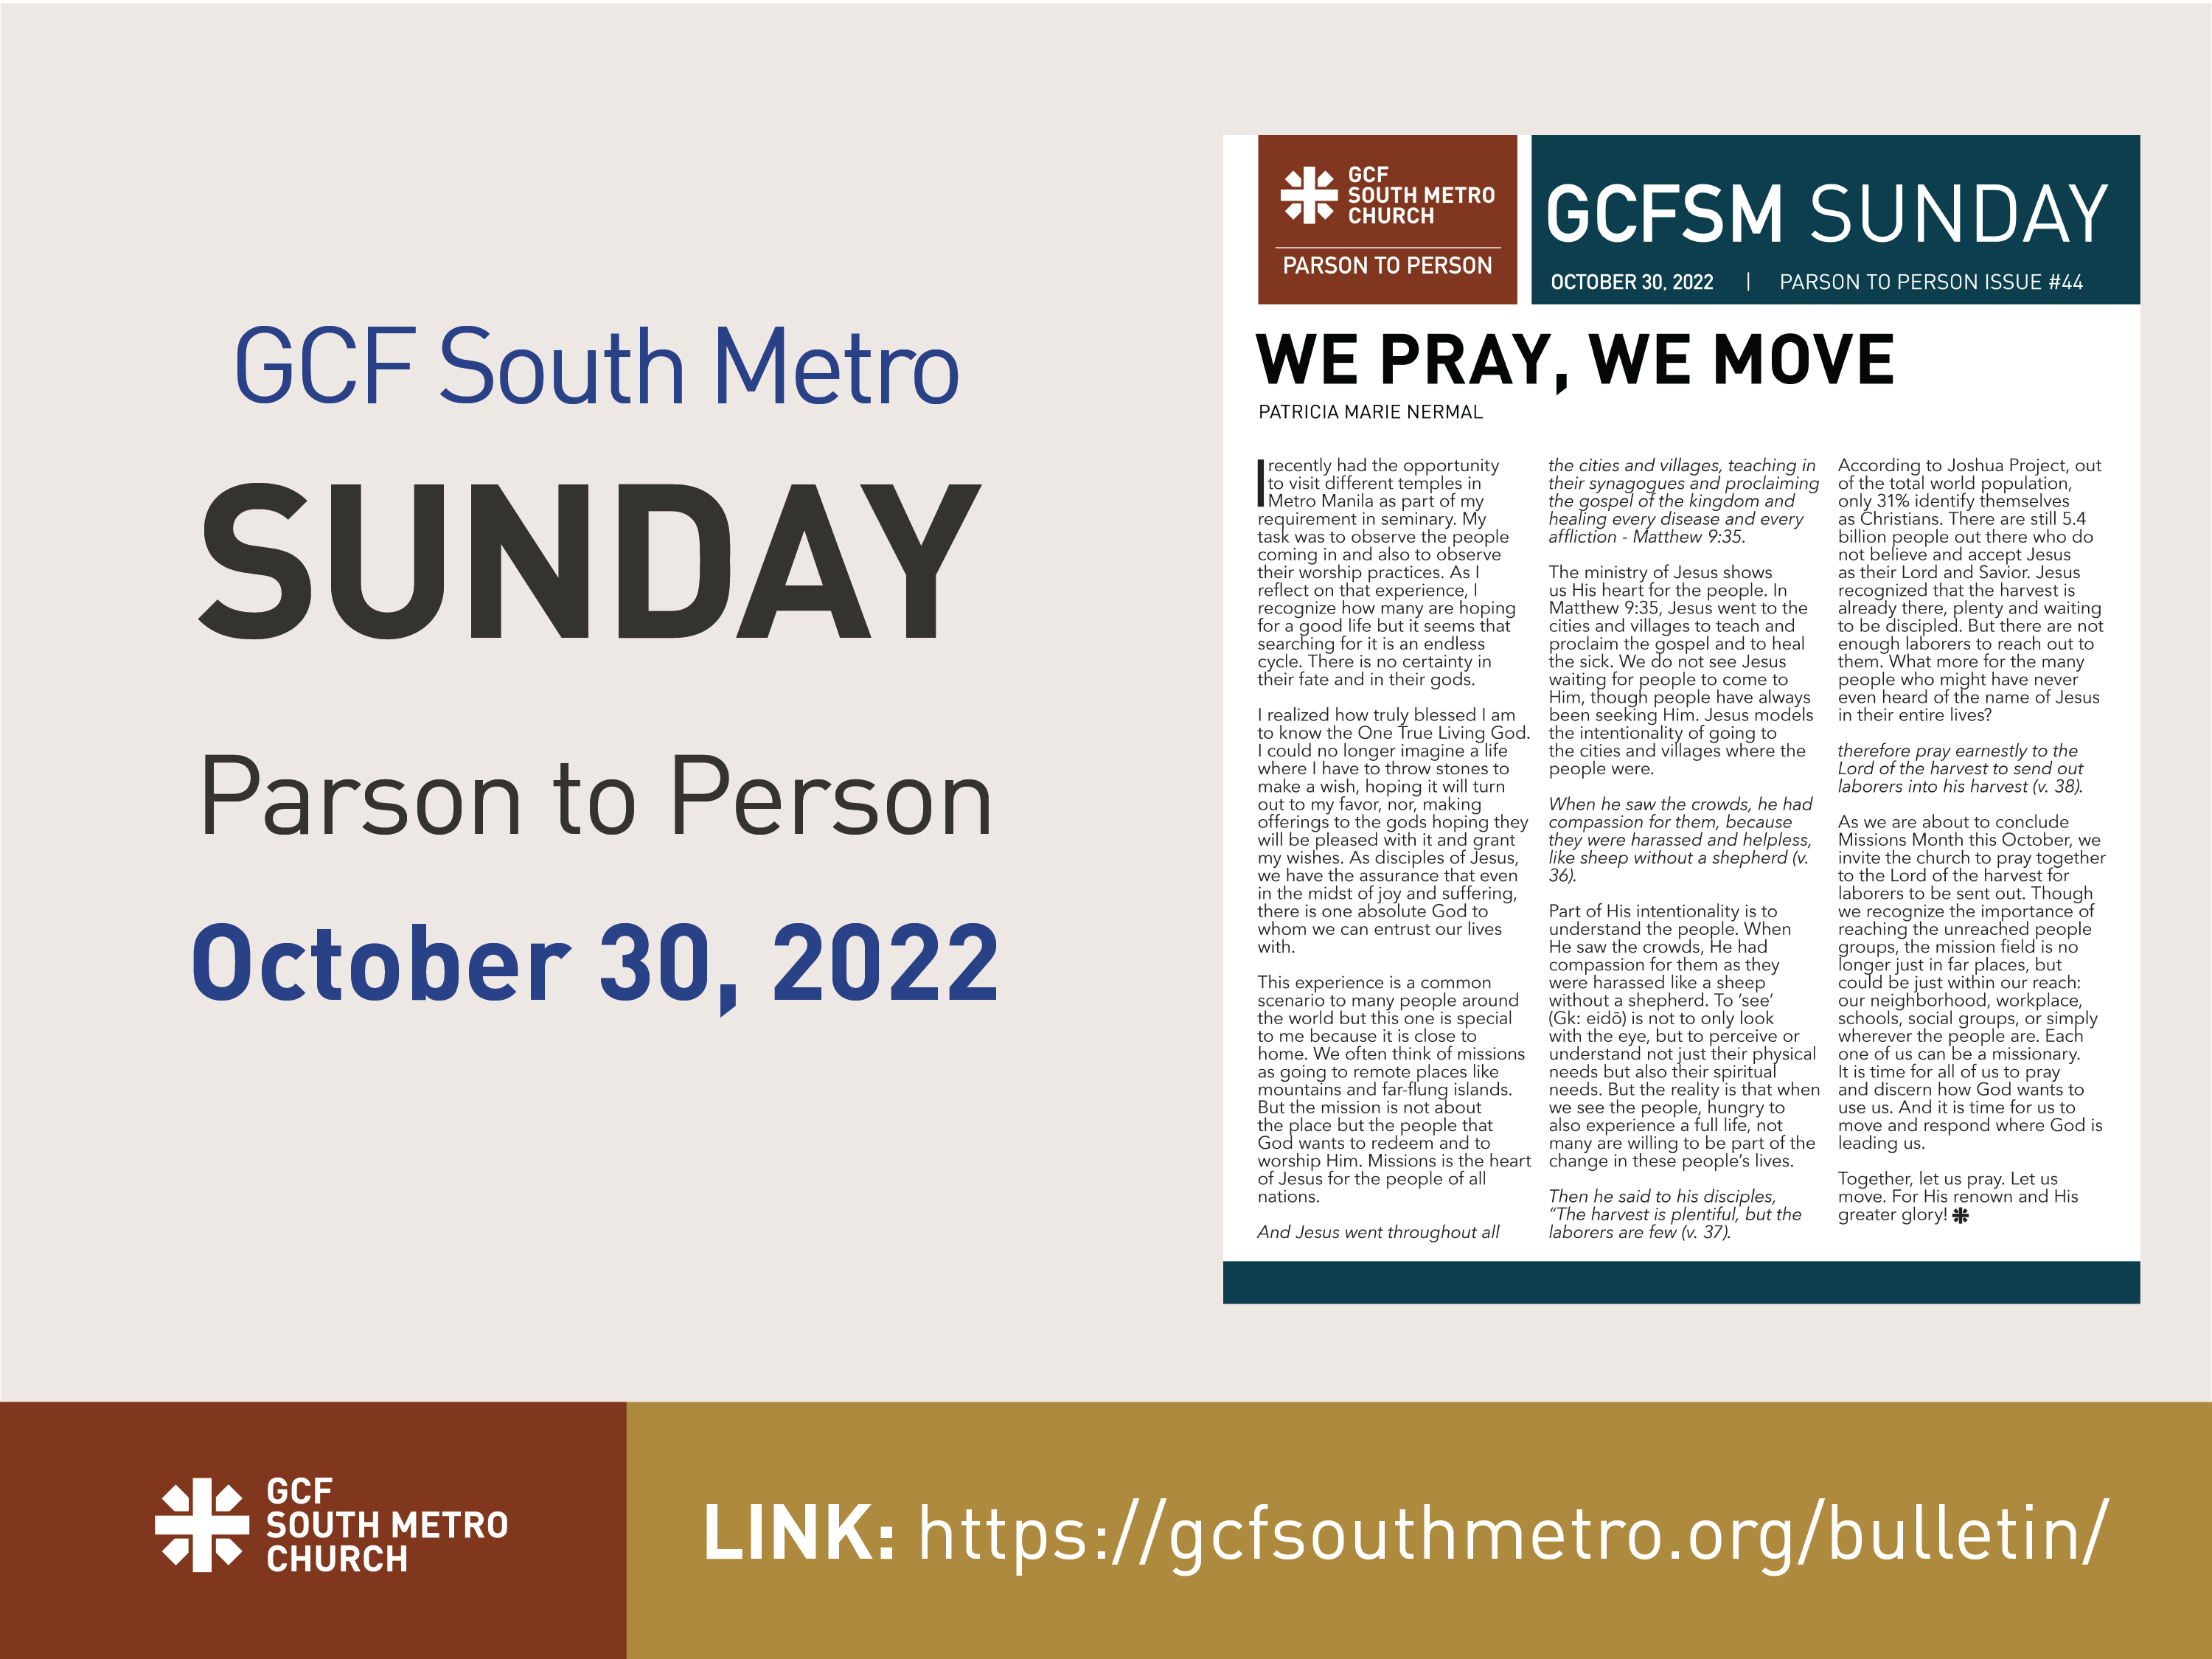 Sunday Bulletin – Parson to Person, October 30, 2022